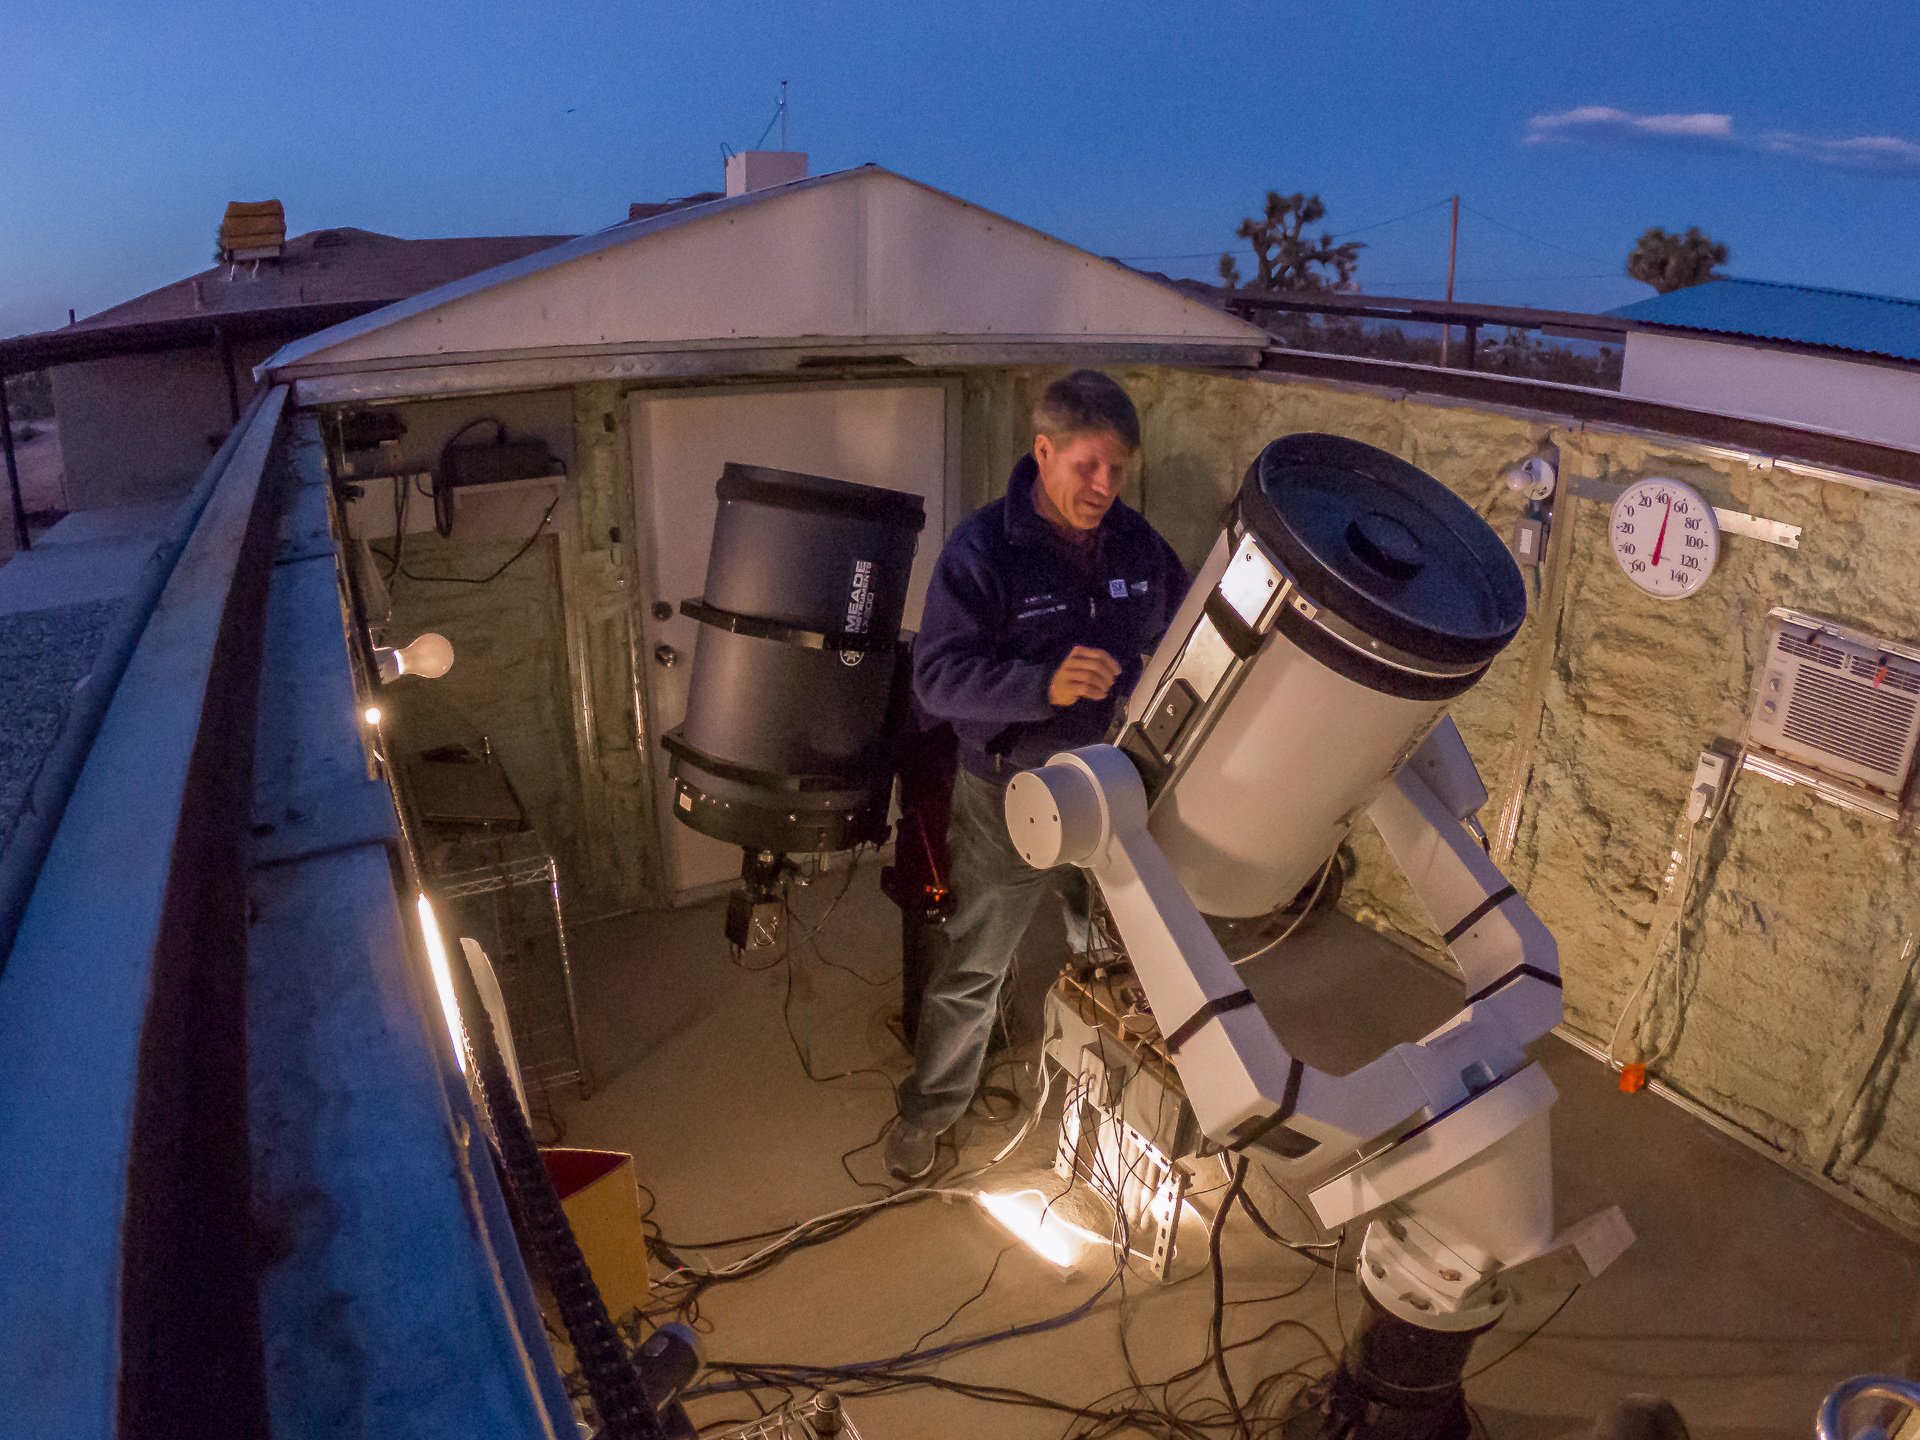 amateur astronomer working on telescope